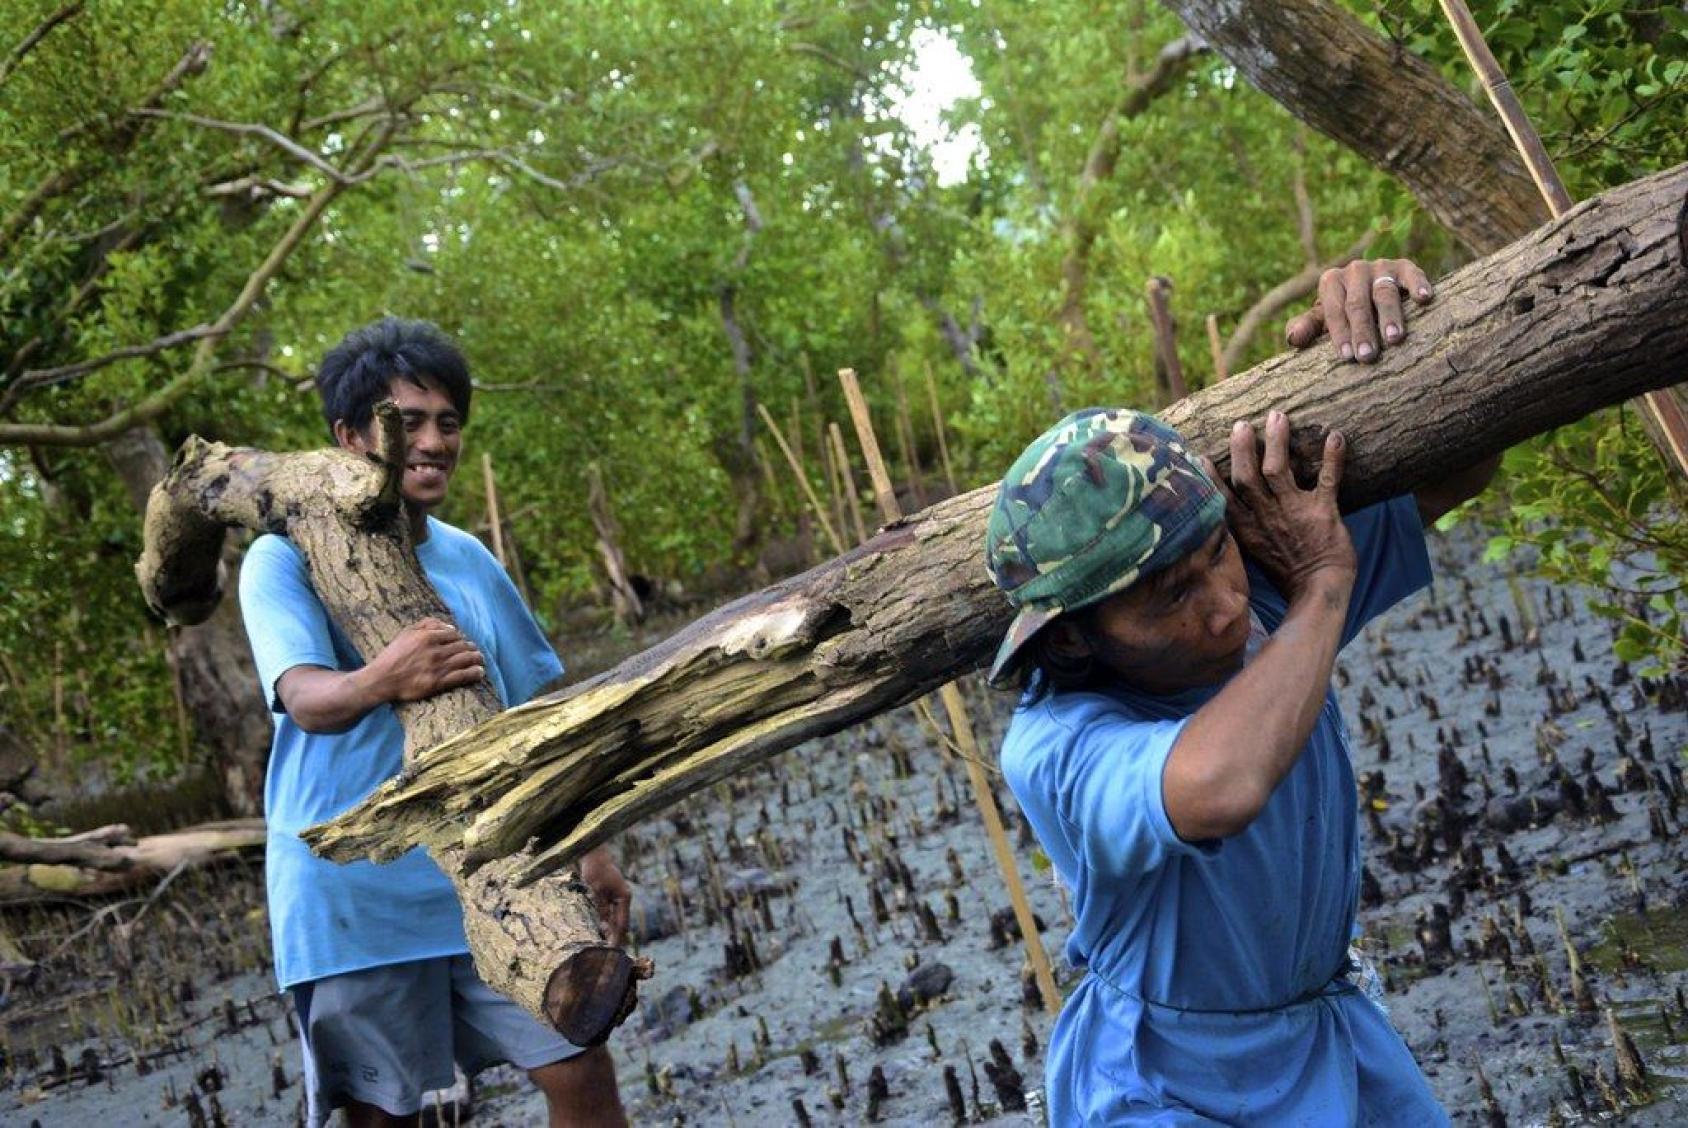 Two men carry a large log across a swamp. One man smiles as he holds the log on his shoulder.